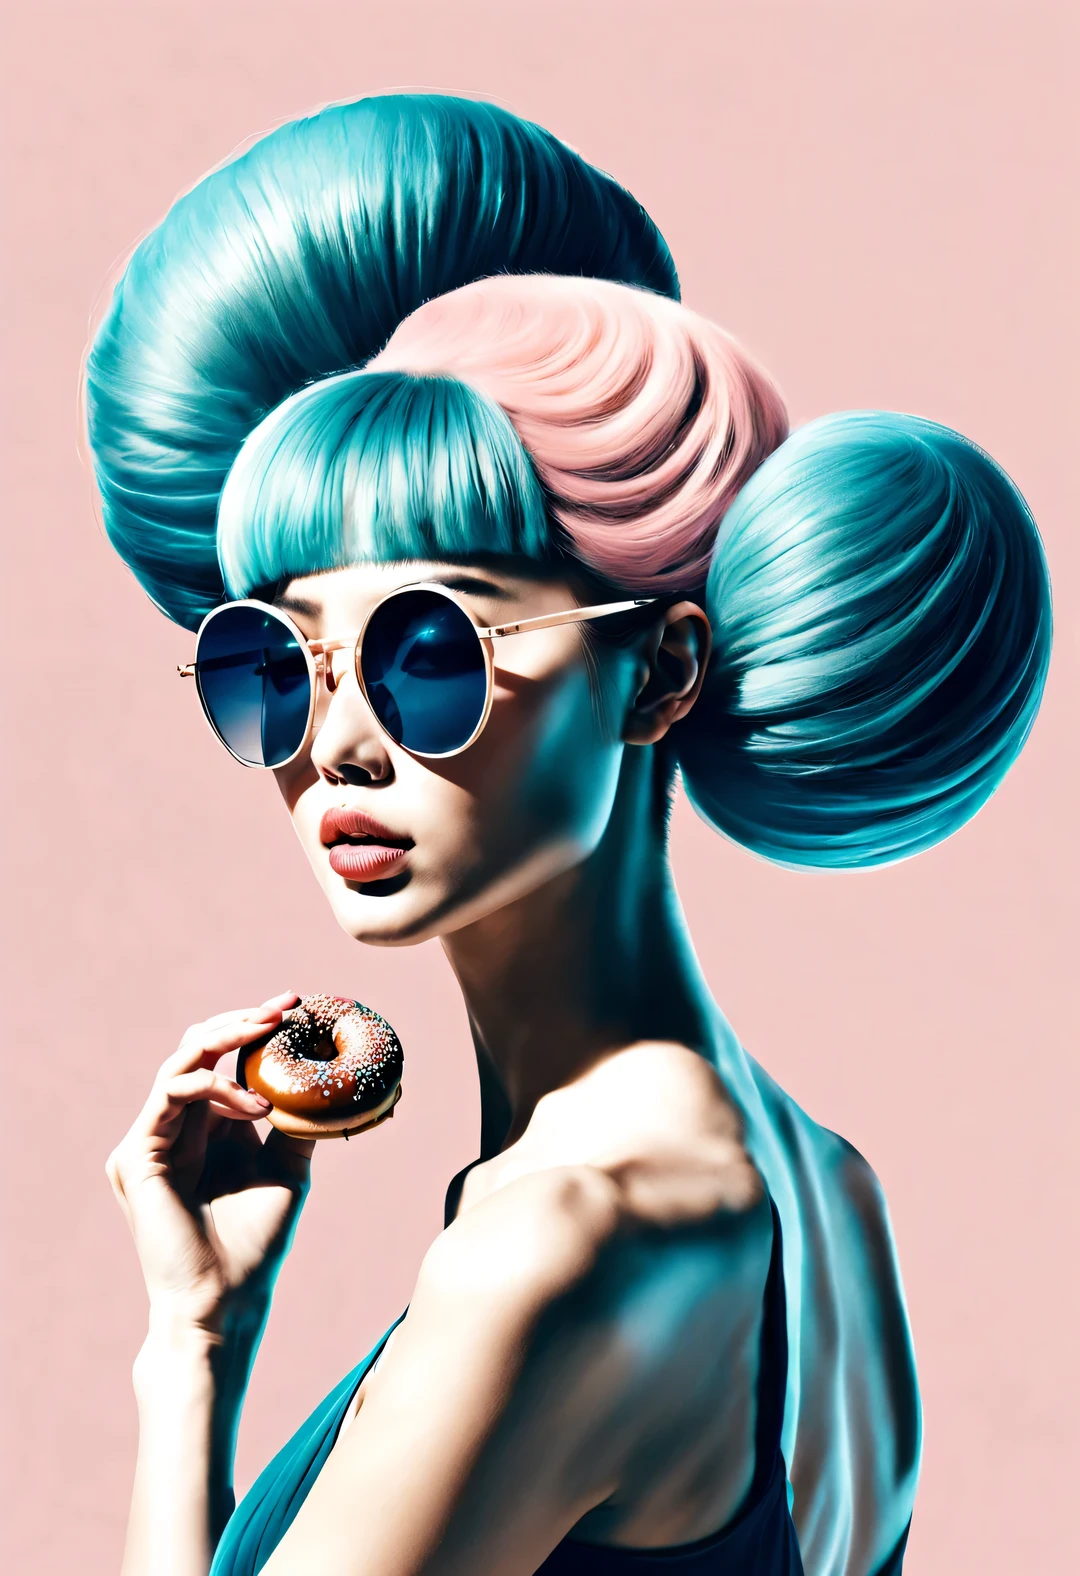 (Modern art dance simple poster design), (Half-length close-up), (Beautiful Chinese girl dancing in the air), (Wear sunglasses and donut bun hairstyle: 1.2), (Soft pink contrasts with deep navy blue), Showing the warmth and depth of winter, Both fashionable and with a touch of gentle feminine charm. Wear modern and stylish winter fashion, slim waist, high nose bridge, Head up posture, sad yet beautiful, slim figure, Exquisite facial features, correct finger,
background: briefcase dance, fog illustration, ink painting, black hair, Proud, Surrealism, contemporary art photography, action painting illustration, abstract expressionism, Pixar, depth of field, motion blur, backlight, shadow, Vignetting, Elevation viewing angle, Sony FE General Manager, ultra high definition, masterpiece, Accuracy, textured skin, Super details, high detail, high quality, Award-winning, best quality, Level, 16k, Photographed from a bottom-up perspective,